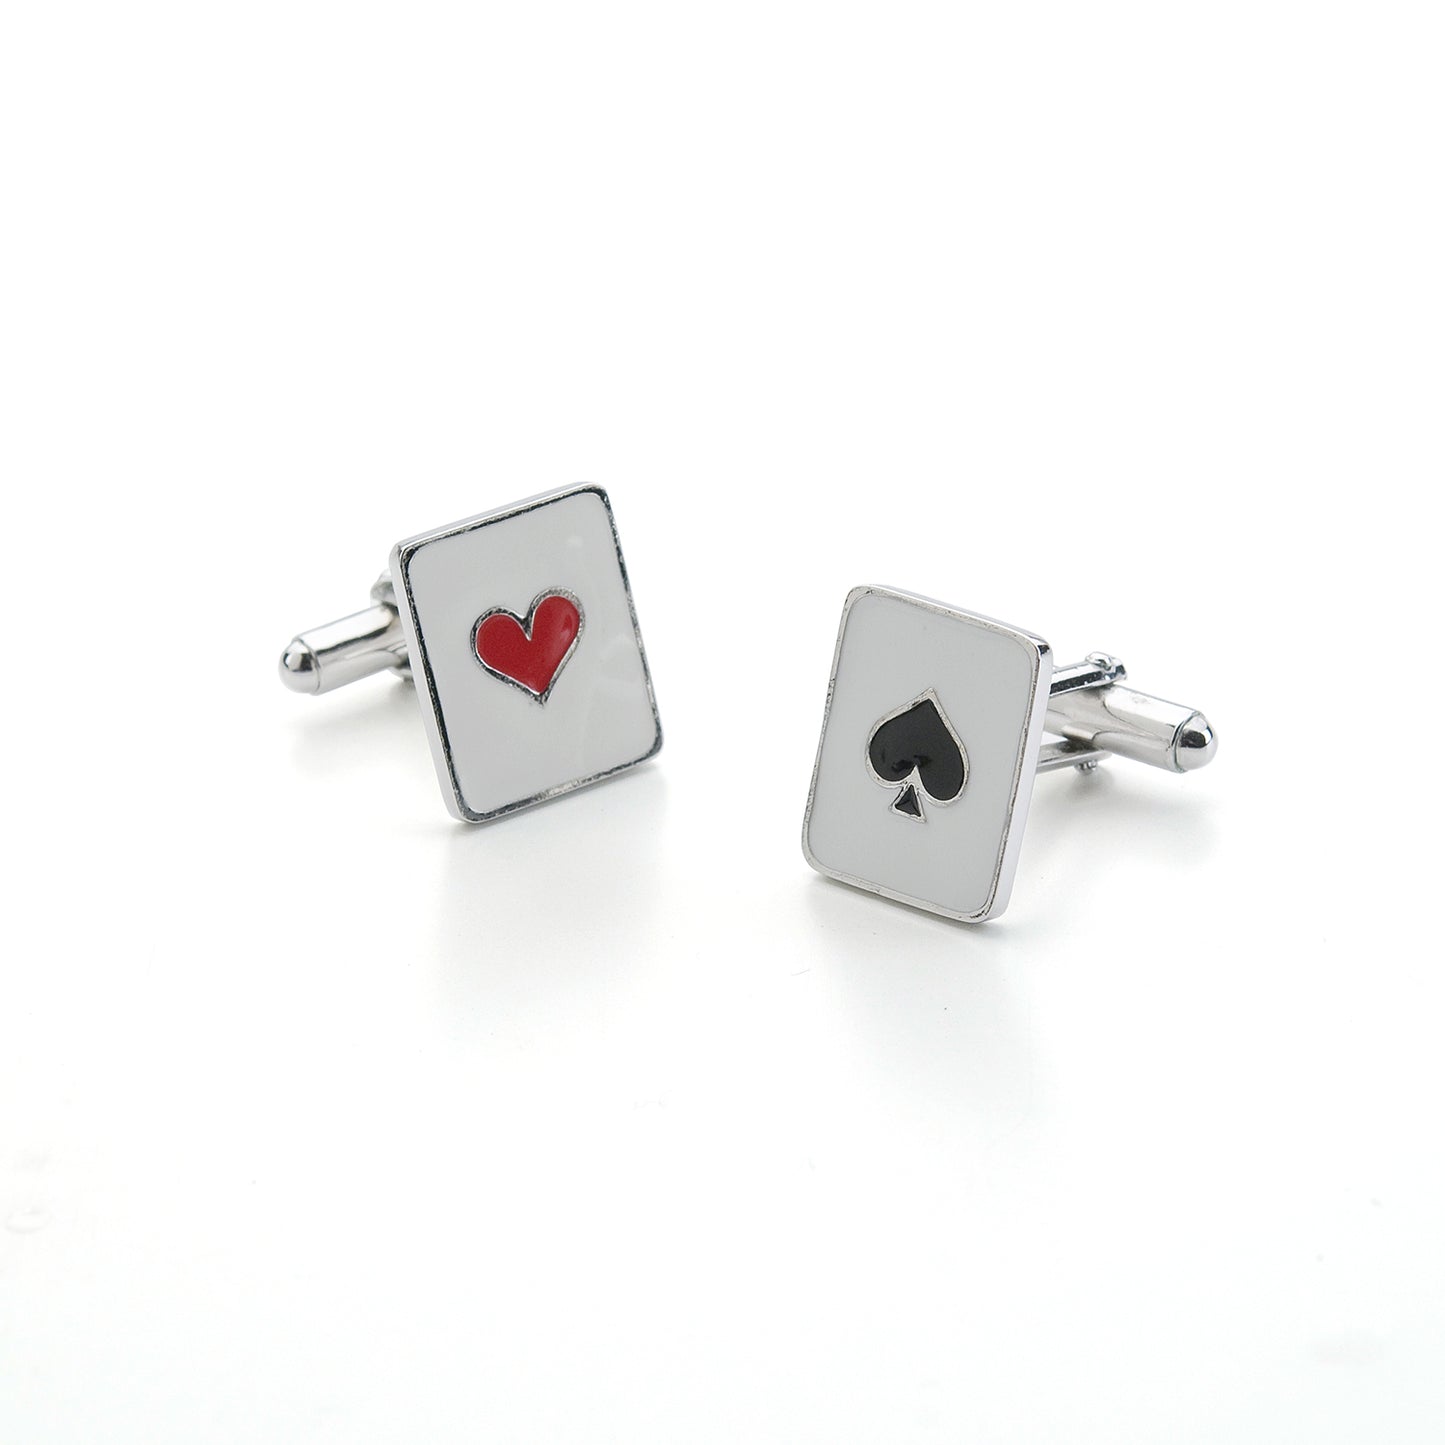 Playing card cufflinks in silver and enamel